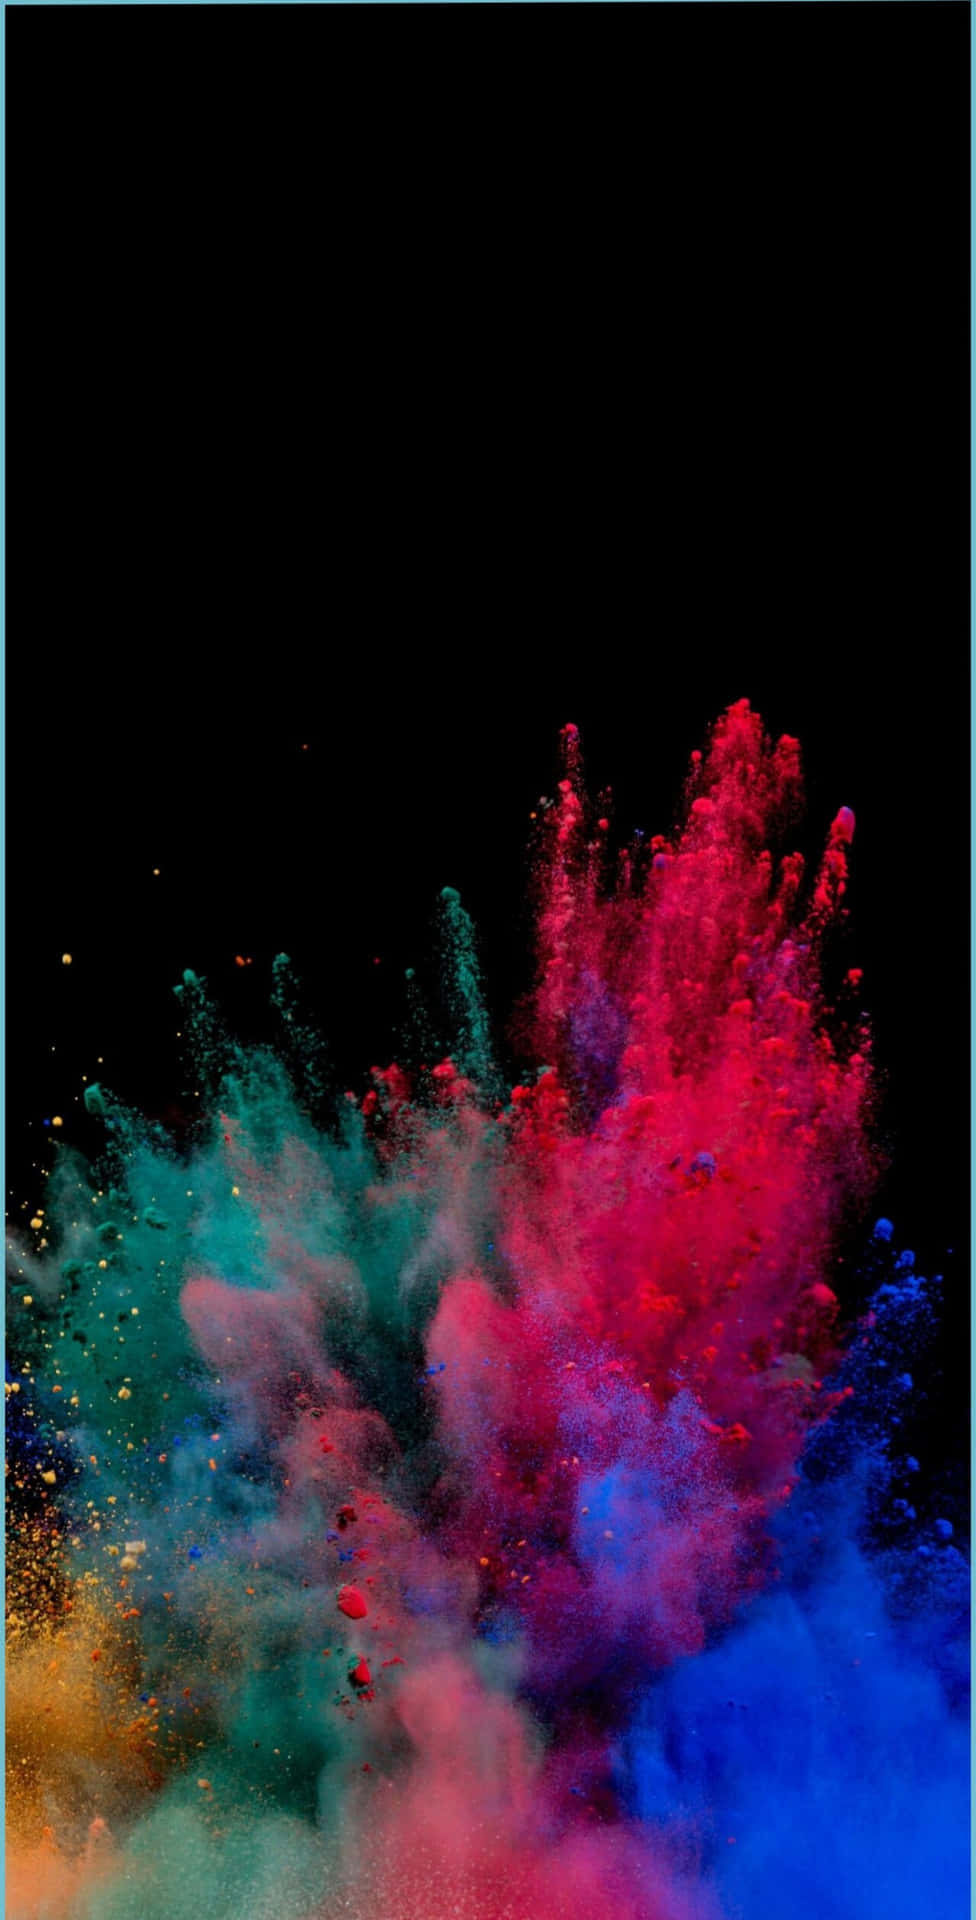 Colorful Aesthetic Explosion Mobile Wallpaper